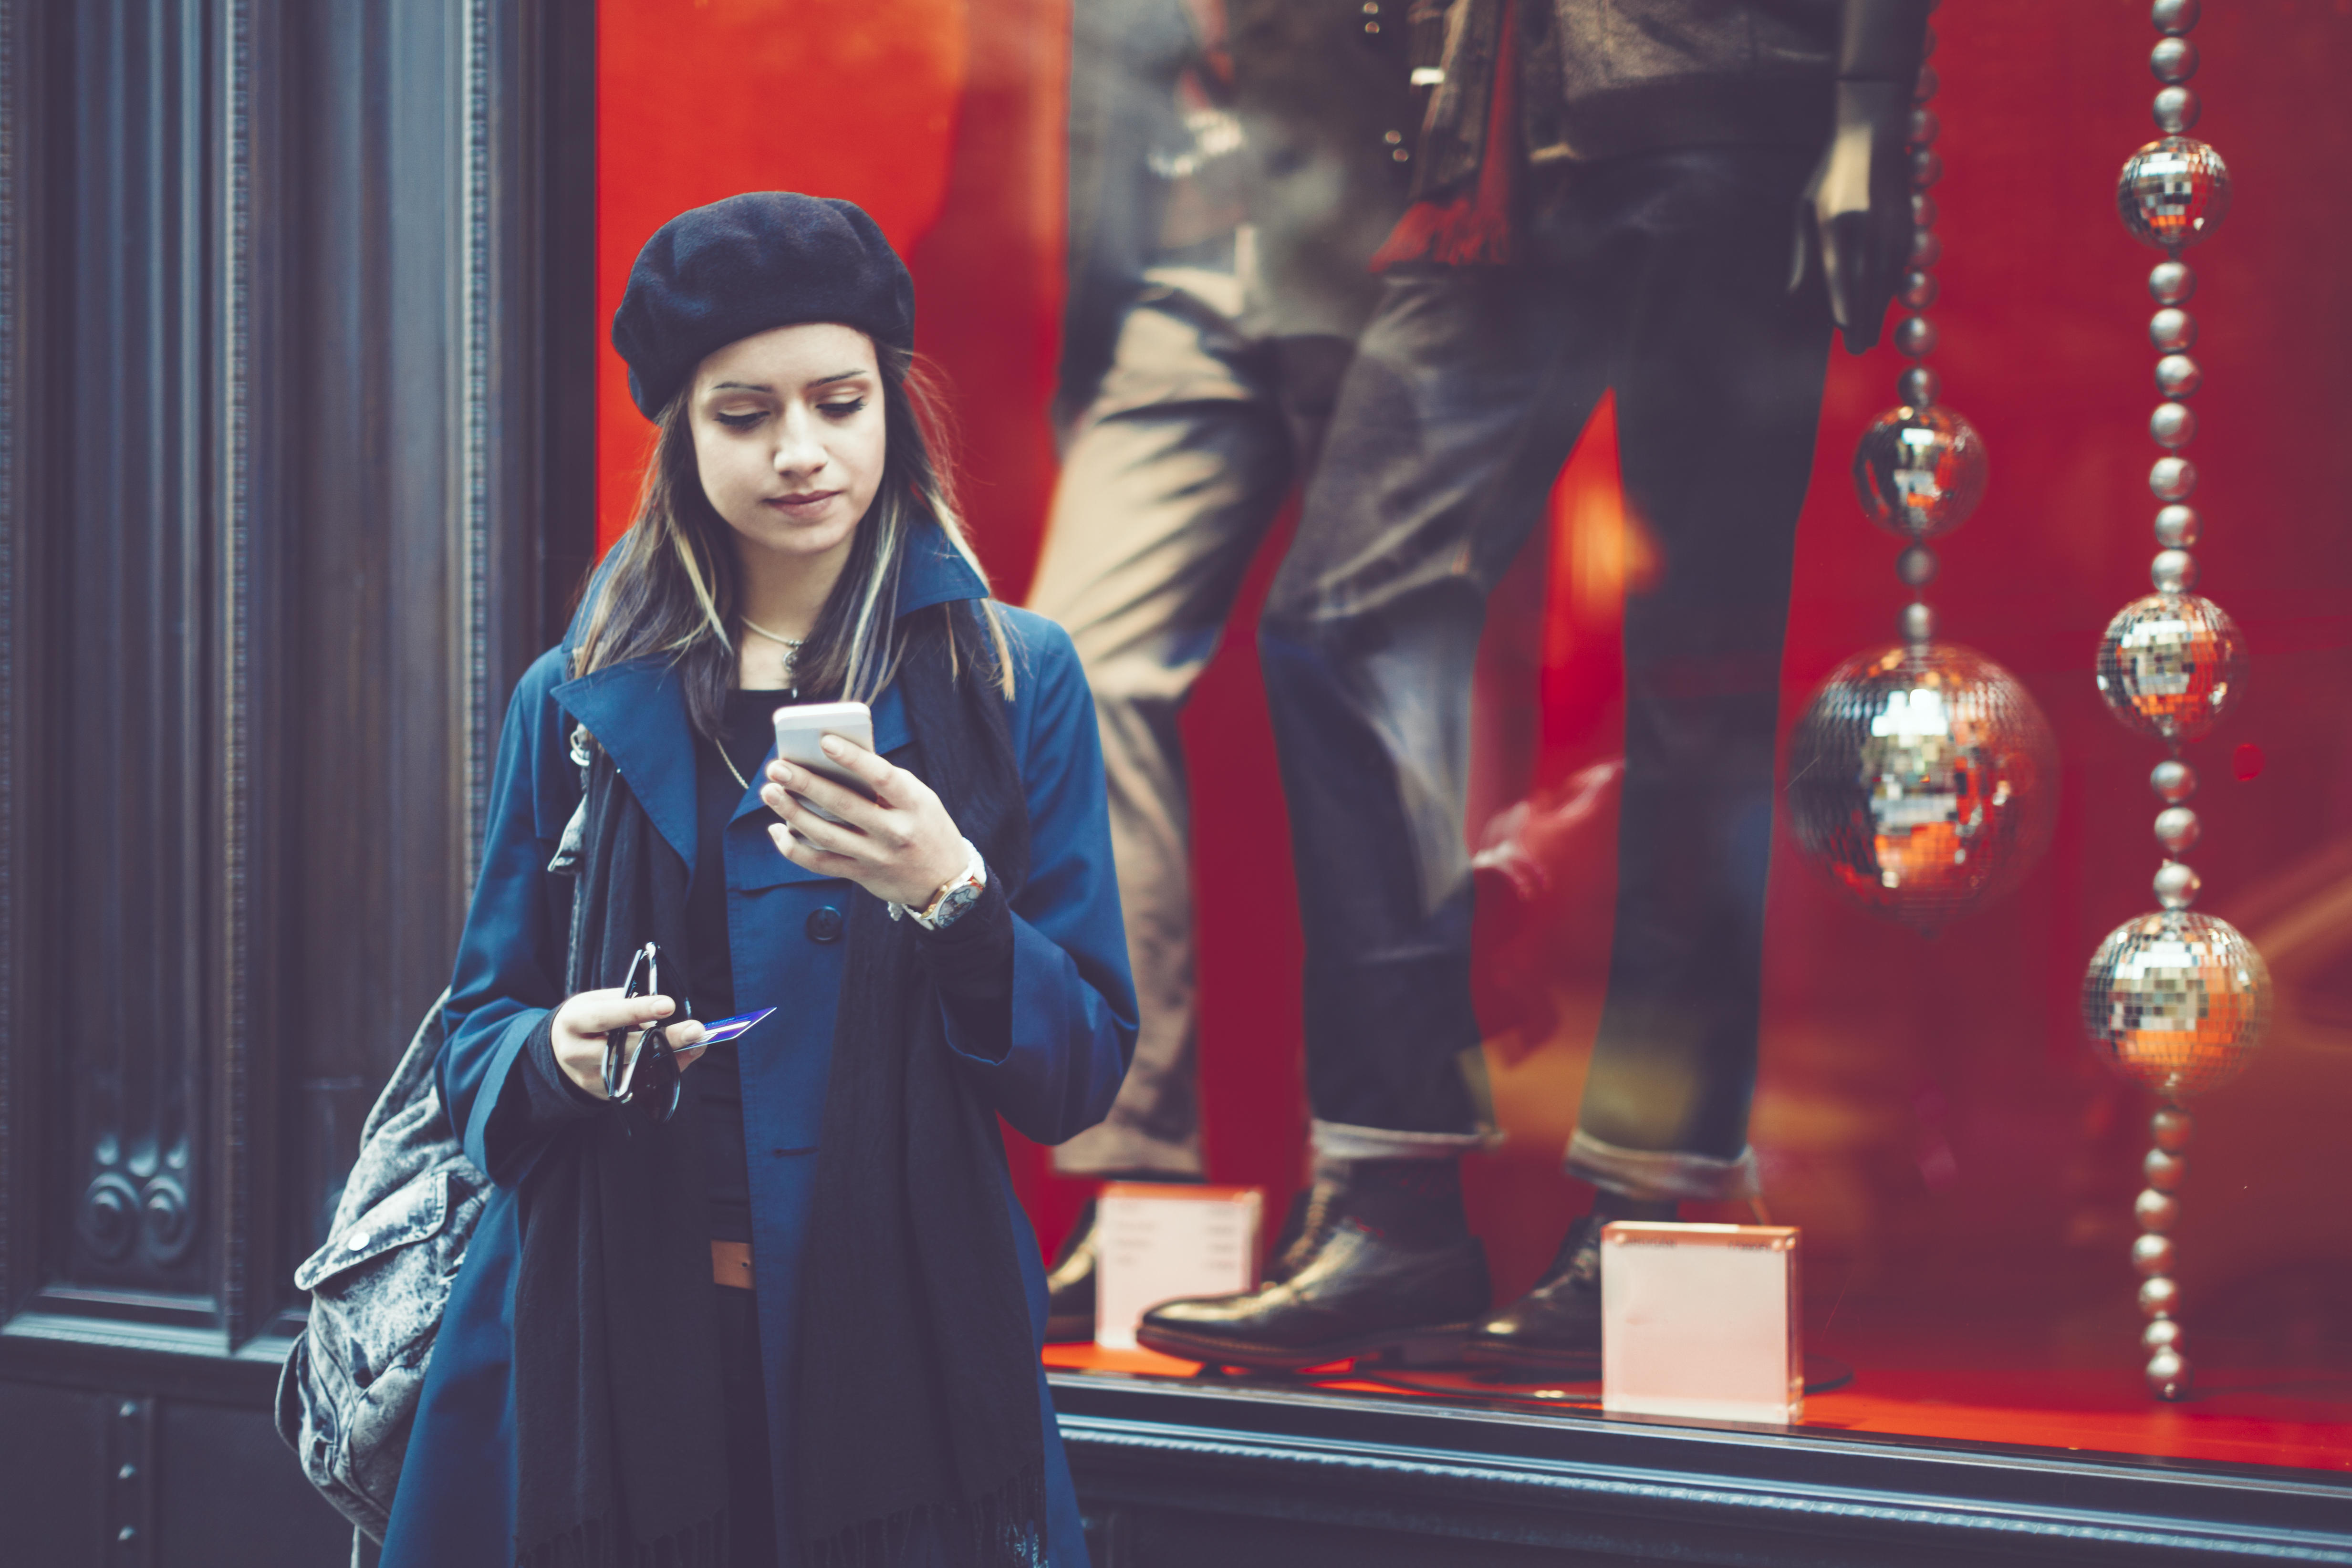 Woman-with-mobile-phone-in-front-of-shop-window